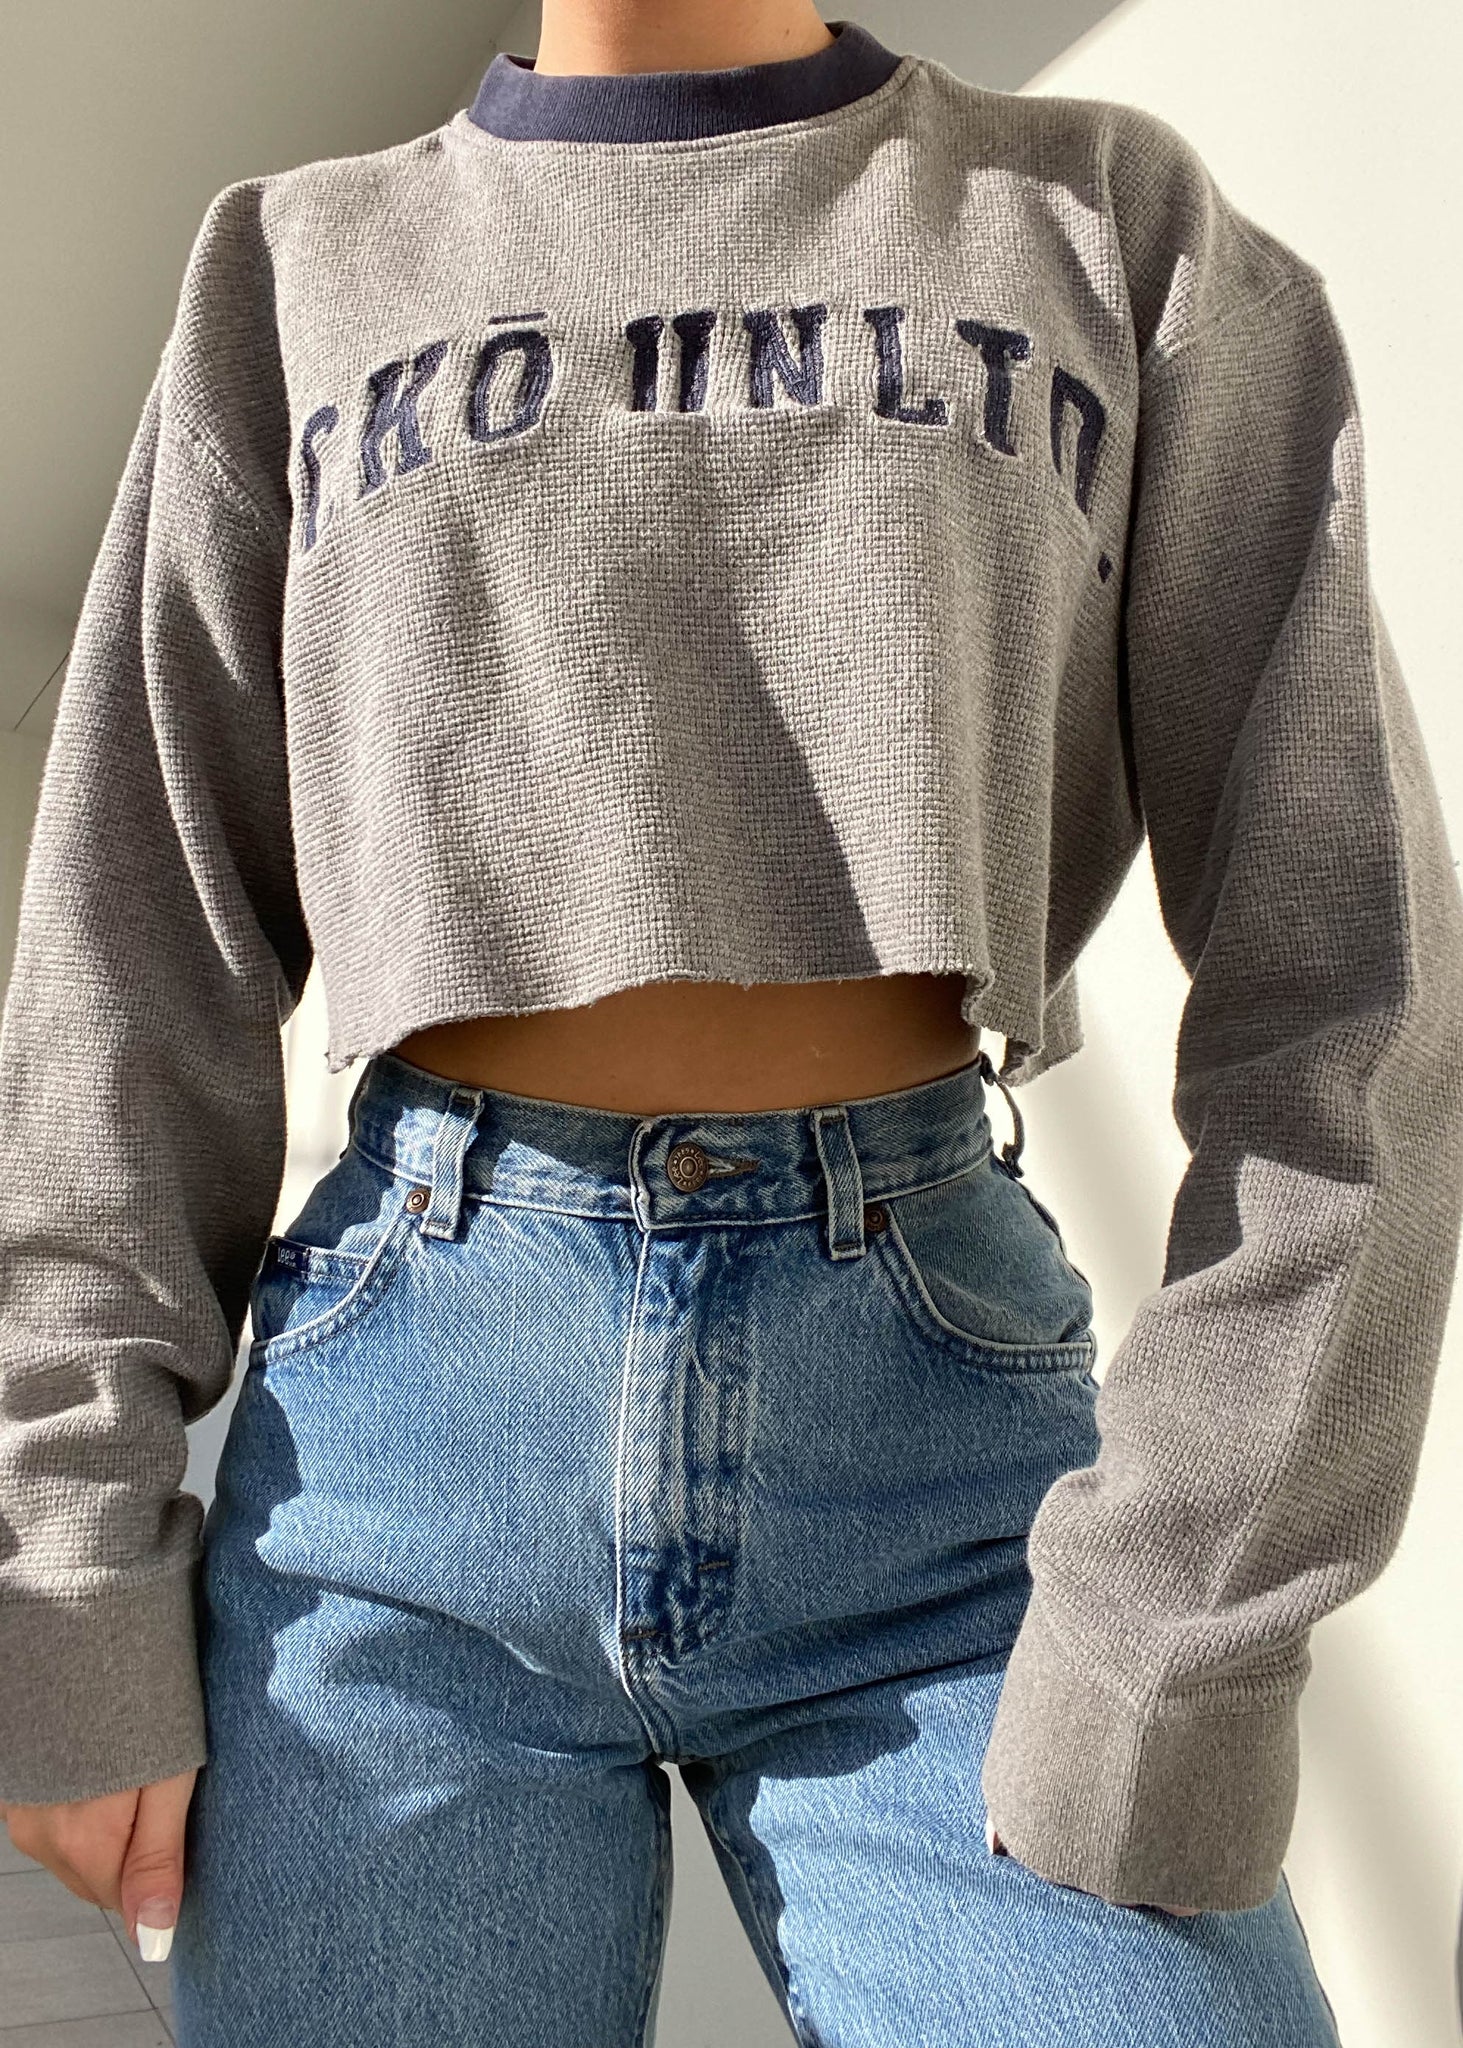 90's Ecko Thermal Long Sleeve (S-M)